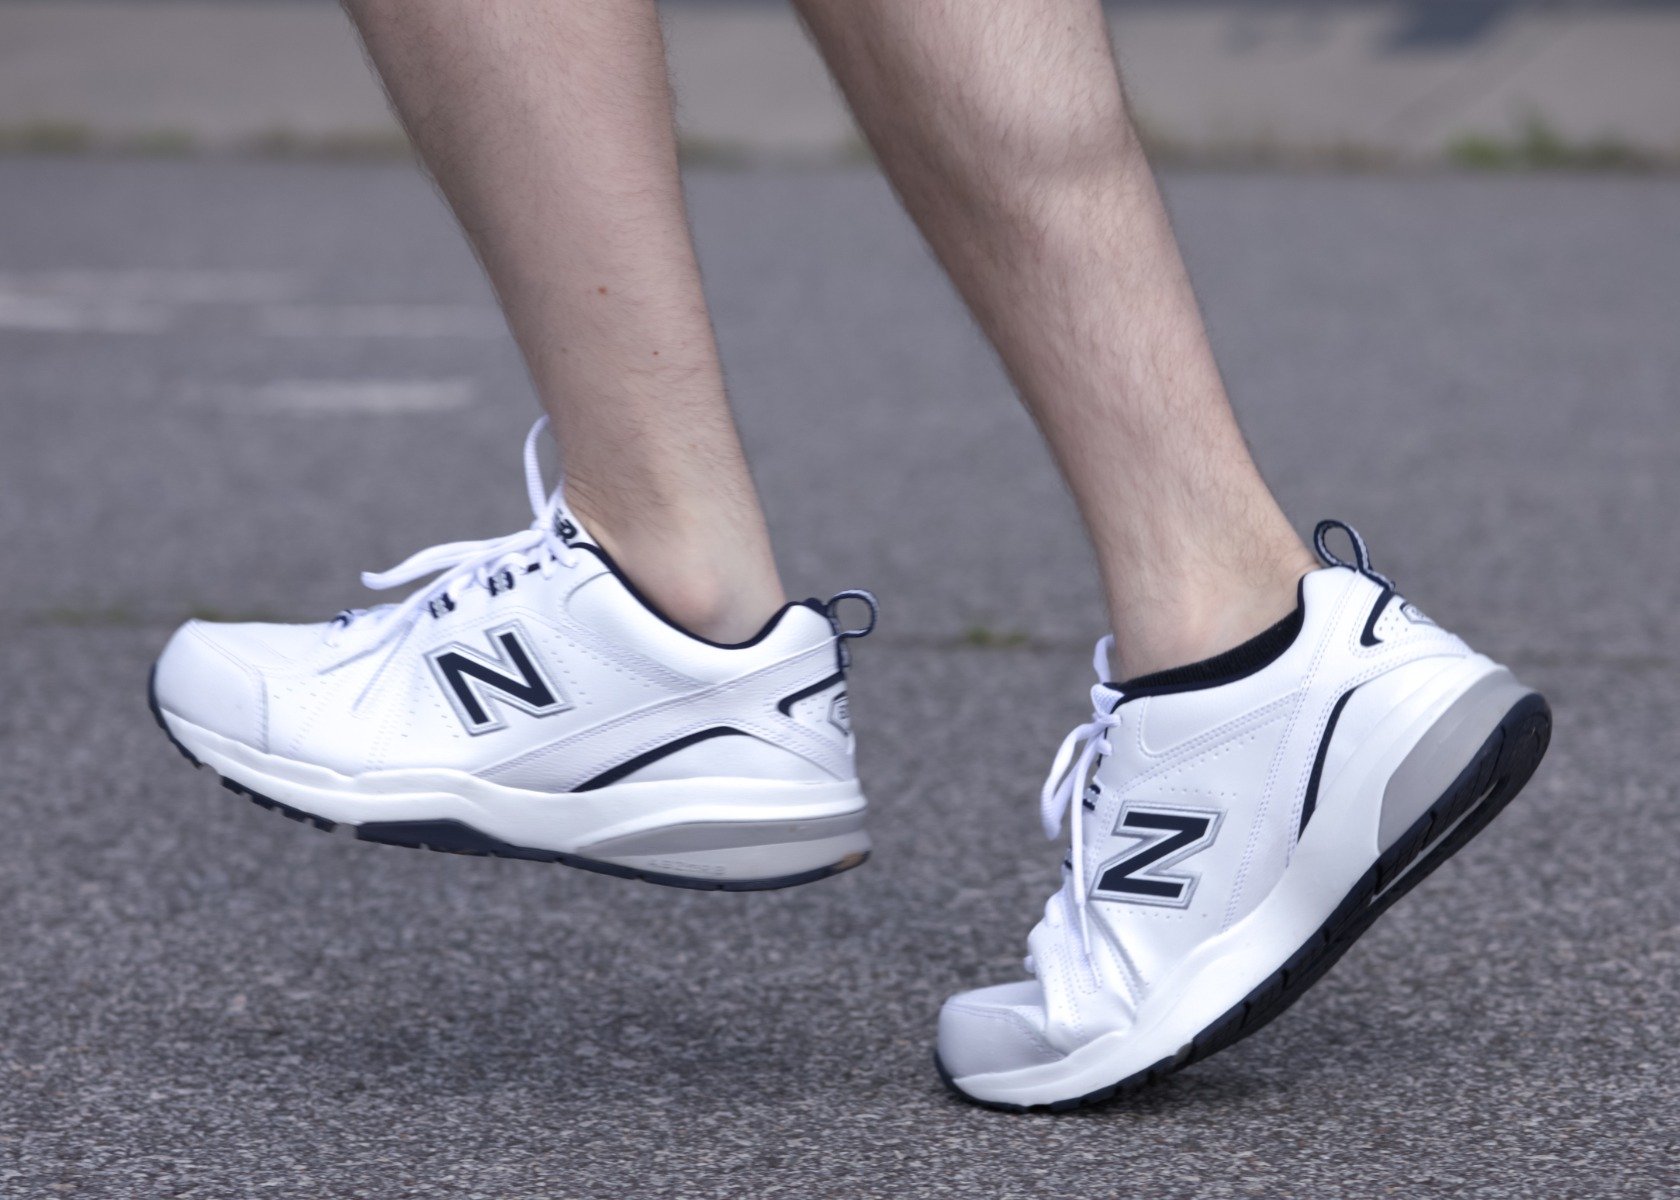 A man wearing white new balance sneakers is running.